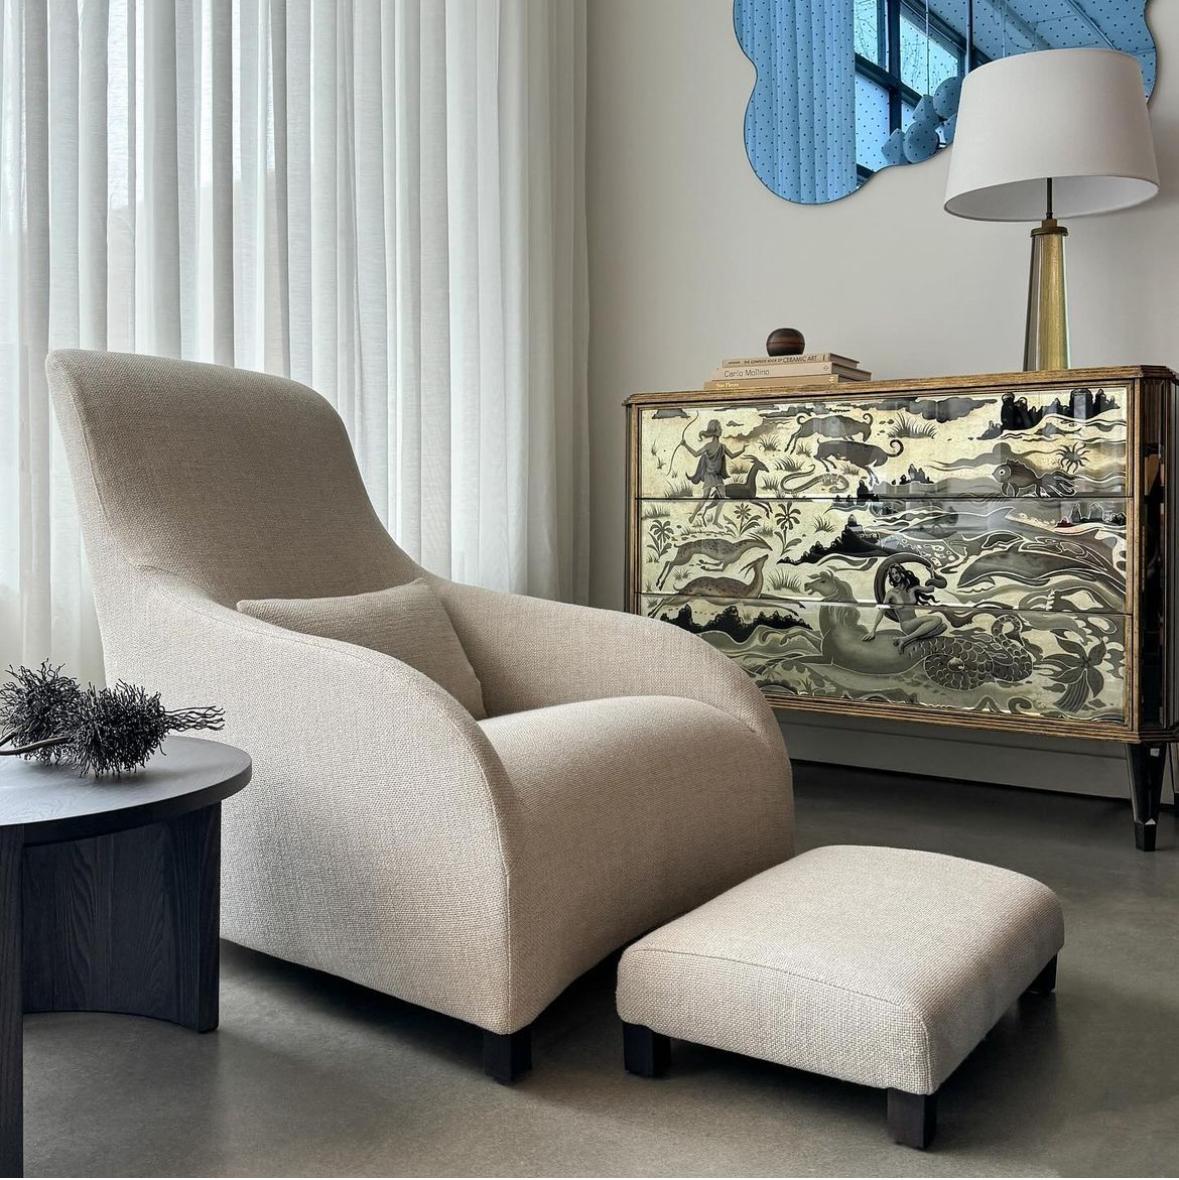 Step into the realm of comfort and sophistication with the Kalos lounge chair and ottoman, designed by Antonio Citterio for B&B Italia / Maxalto in 1997. This chair and ottoman set, newly upholstered in a serene oatmeal-colored linen blend fabric